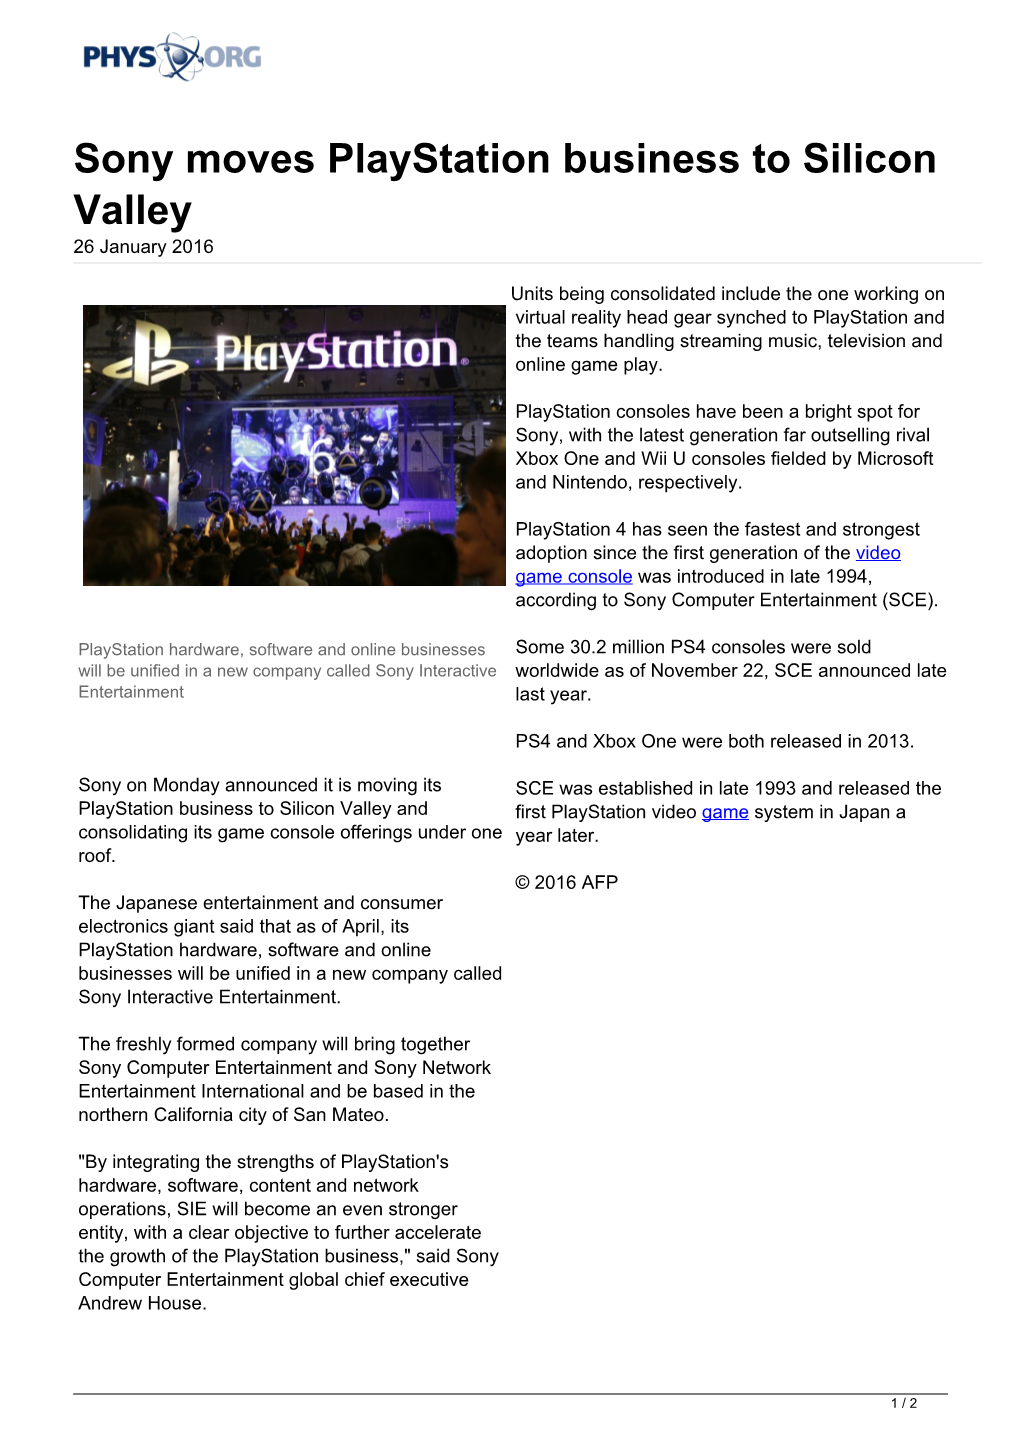 Sony Moves Playstation Business to Silicon Valley 26 January 2016